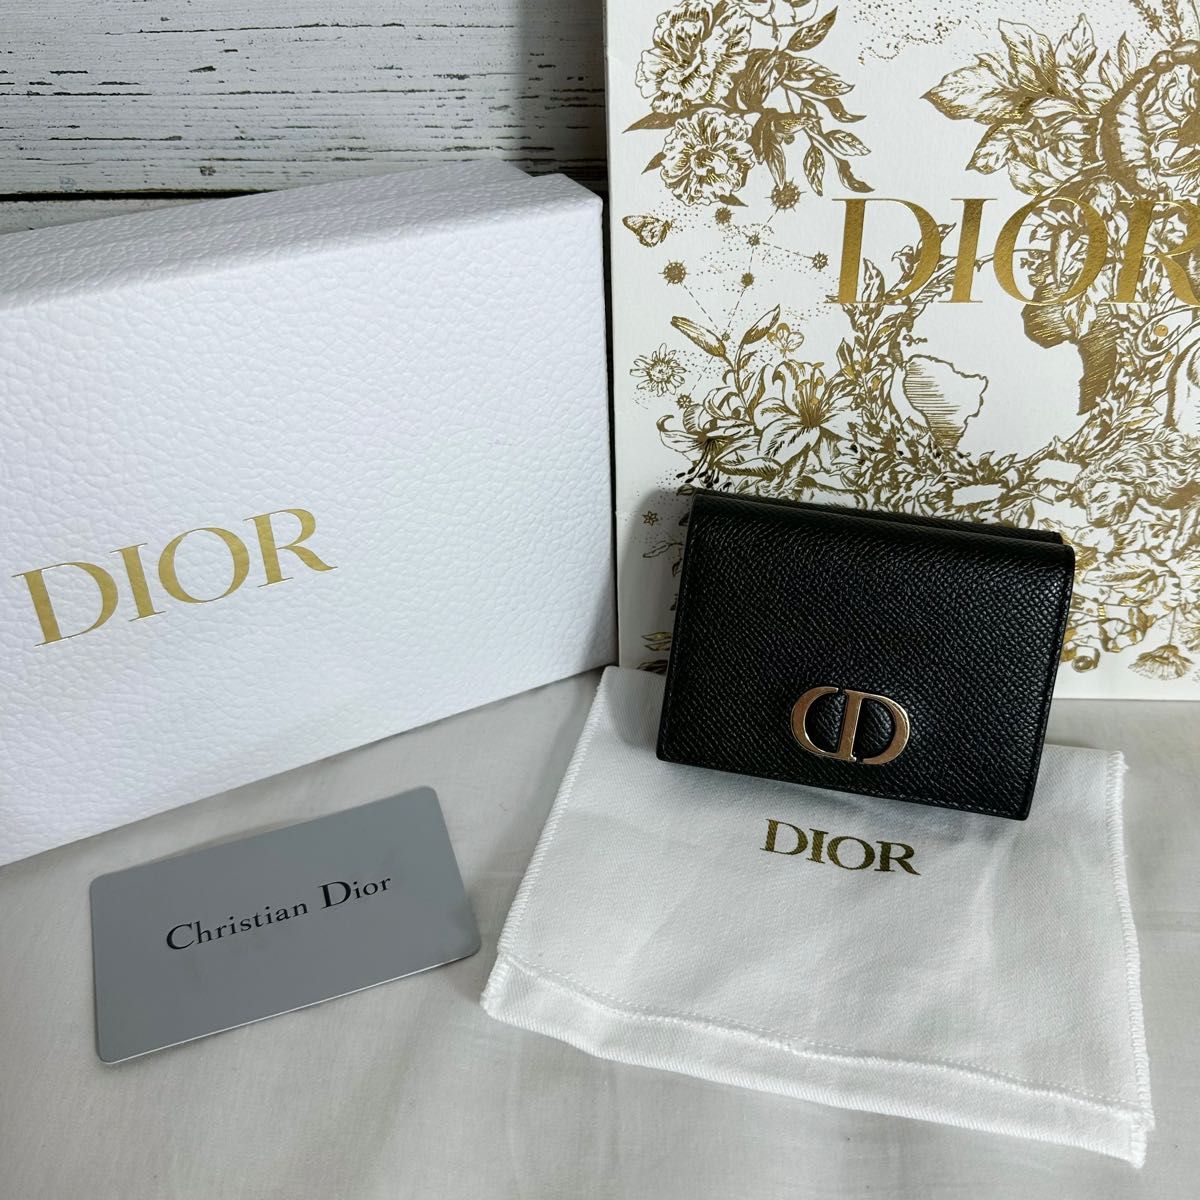 Christian Dior 30 MONTAIGNE コンパクト ウォレット